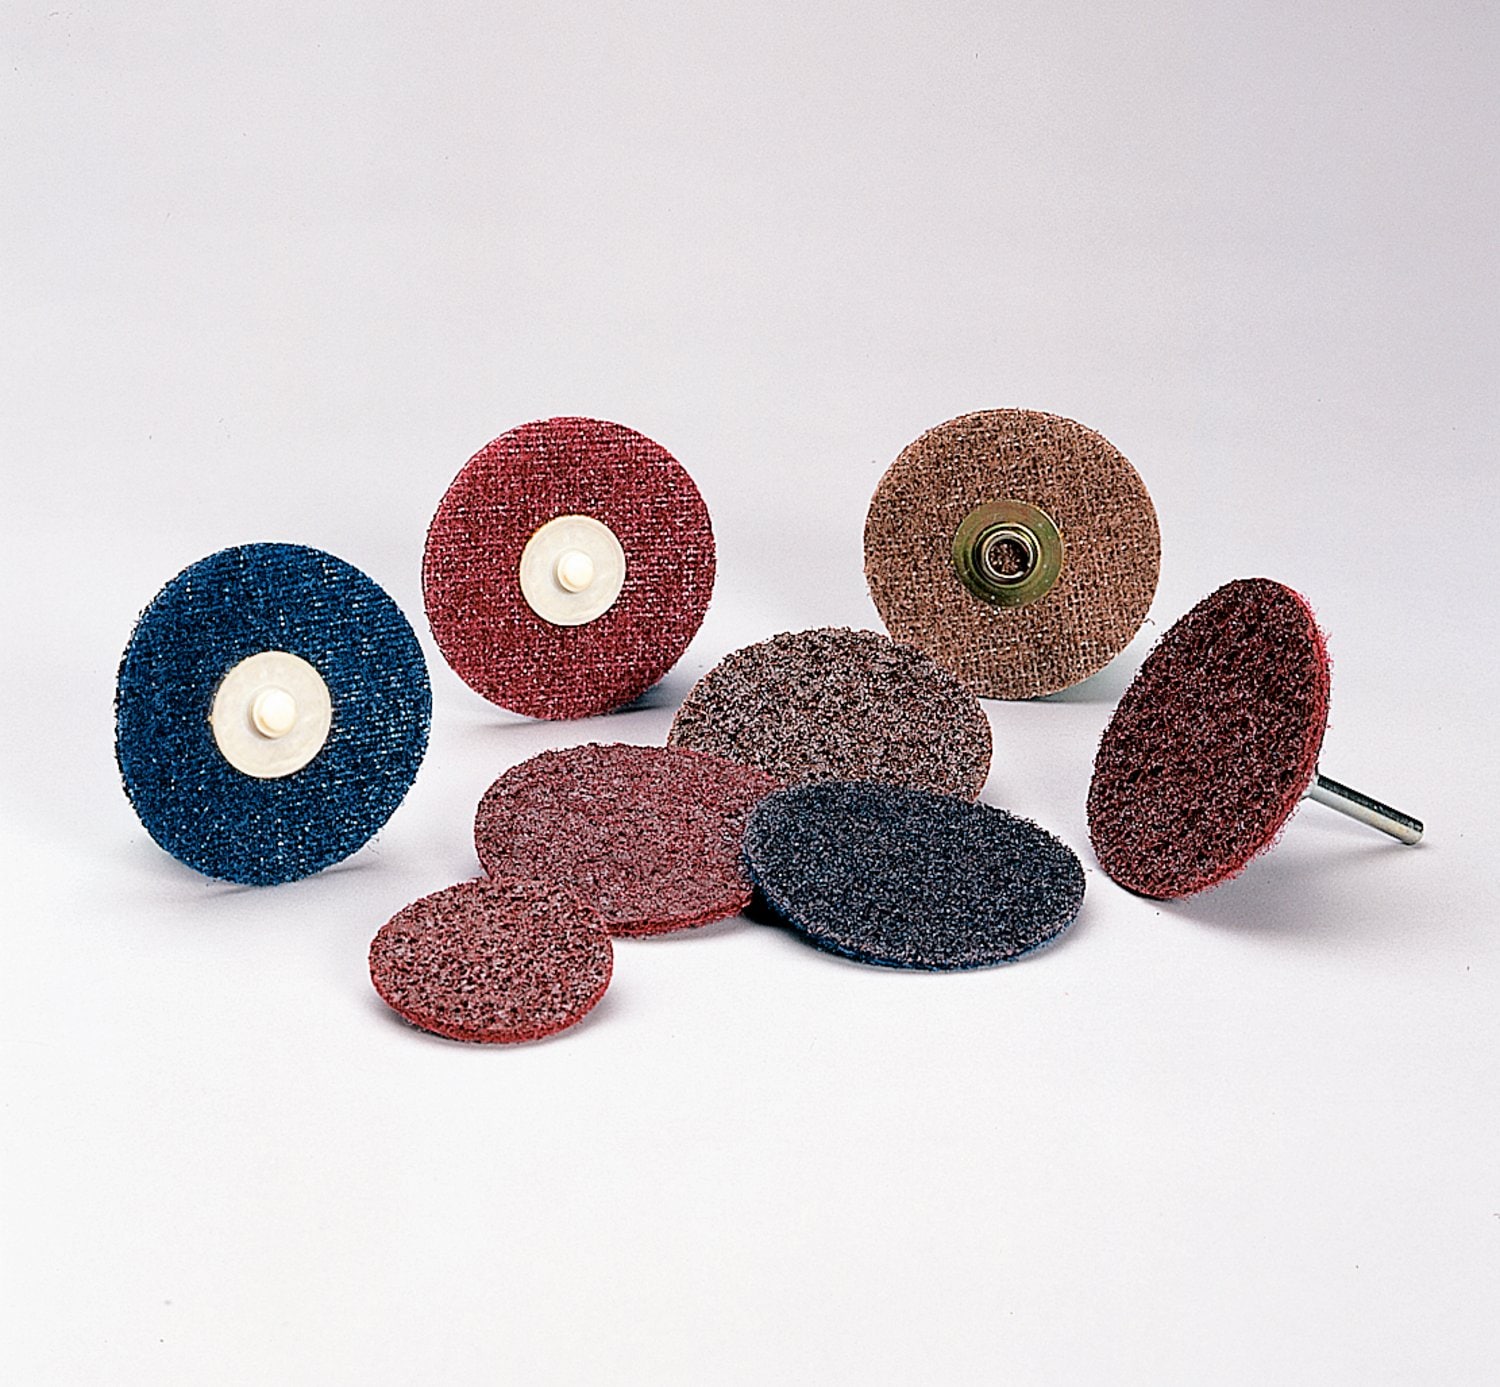 7010330803 - Standard Abrasives Surface Conditioning RC Disc, 845815, 7 in MED,
10/Pac, 100 ea/Case